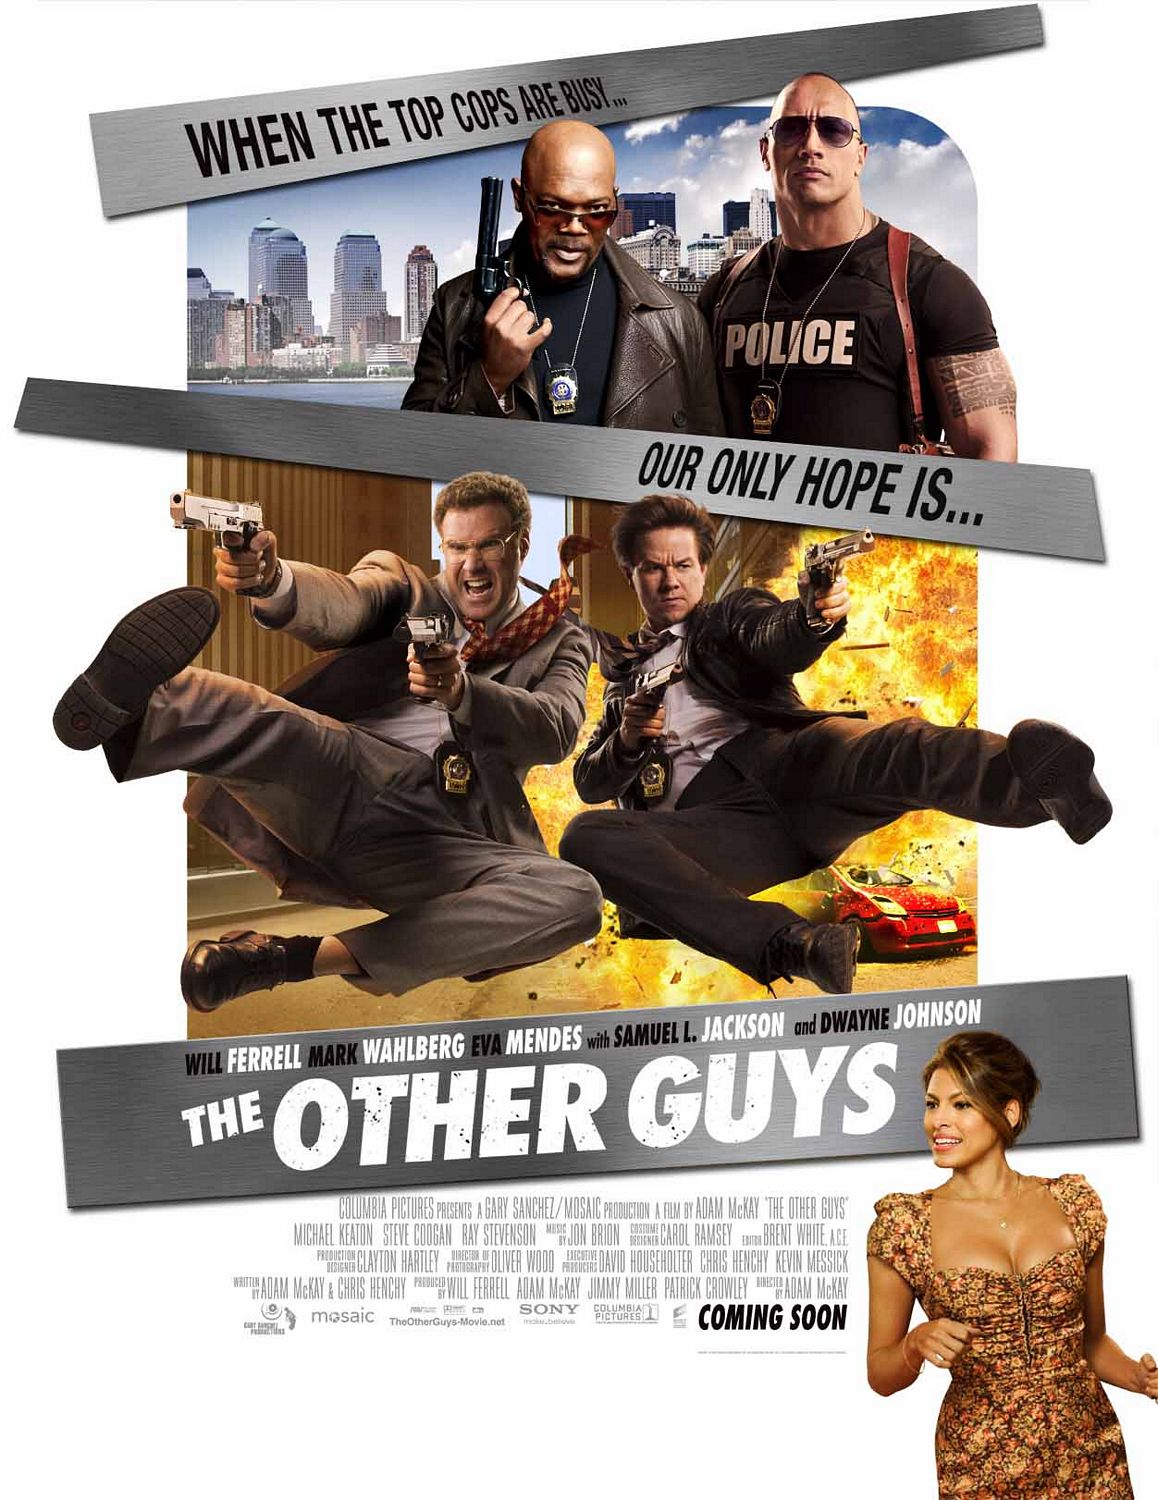 The Other Guys (2010)